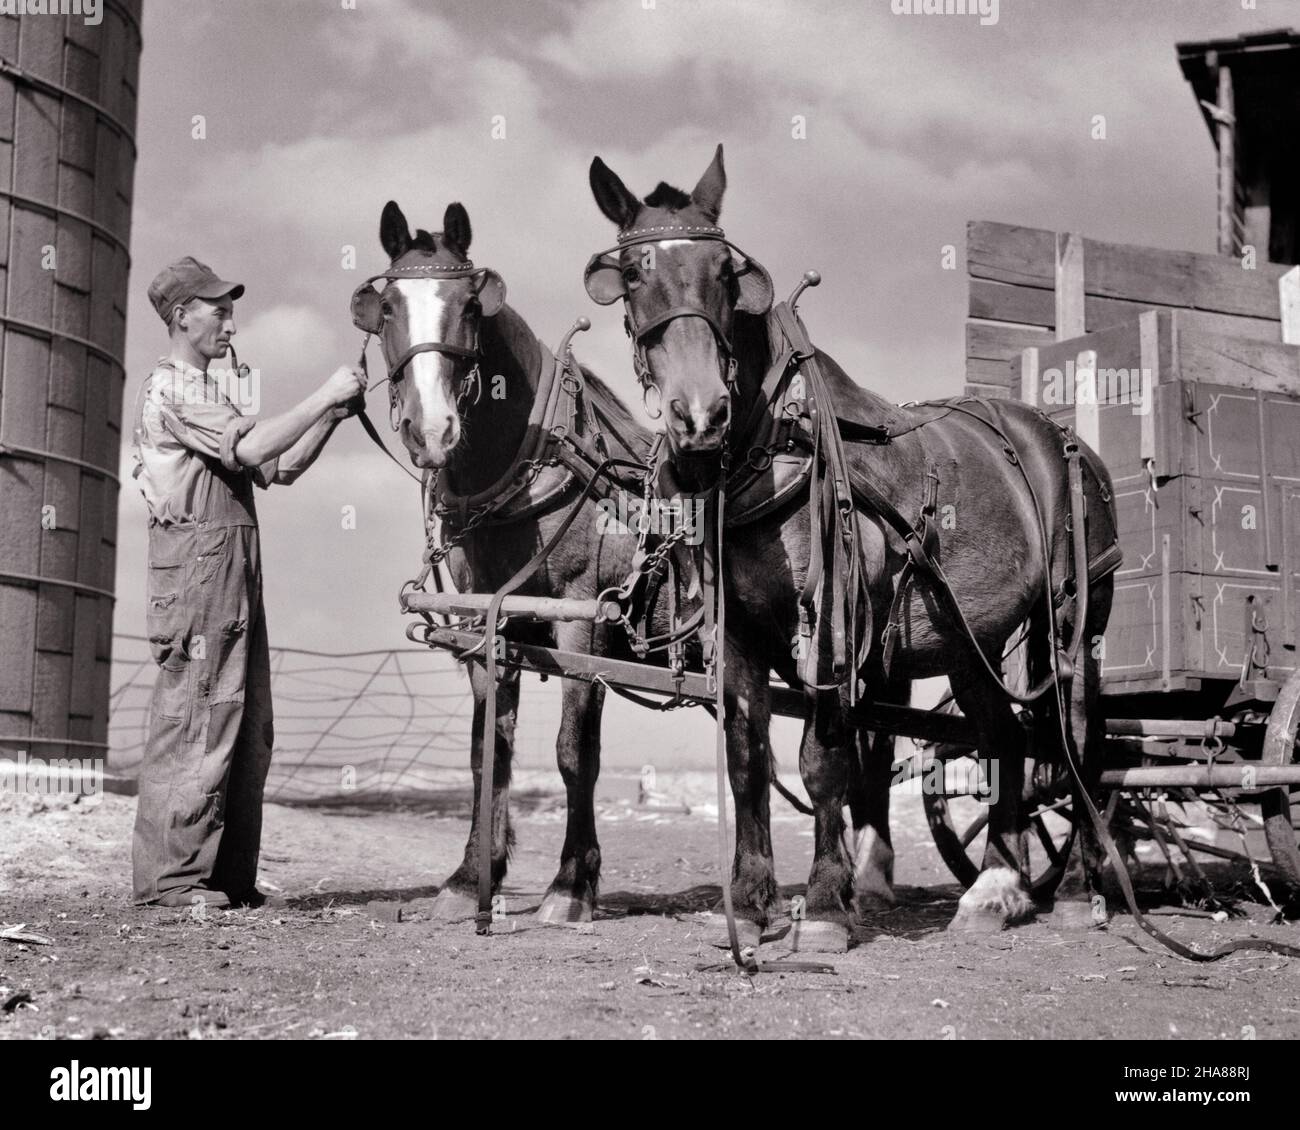 1930s 1940s FARMER SMOKING A PIPE WEARING OVERALLS ADJUSTING HARNESS ON TEAM OF WORK HORSES LOOKING AT CAMERA BOONE IOWA USA - h695 HAR001 HARS UNITED STATES COPY SPACE FULL-LENGTH PERSONS OVERALLS UNITED STATES OF AMERICA FARMING MALES WHEELS CONFIDENCE TRANSPORTATION MIDDLE-AGED AGRICULTURE B&W NORTH AMERICA MIDDLE-AGED MAN NORTH AMERICAN SKILL OCCUPATION SKILLS MAMMALS STRENGTH IOWA FARMERS KNOWLEDGE LABOR OCCUPATIONS CONNECTION CONCEPTUAL HARNESS STYLISH WAGONS BOONE COOPERATION MAMMAL ADJUSTING BLACK AND WHITE HAR001 OLD FASHIONED Stock Photo